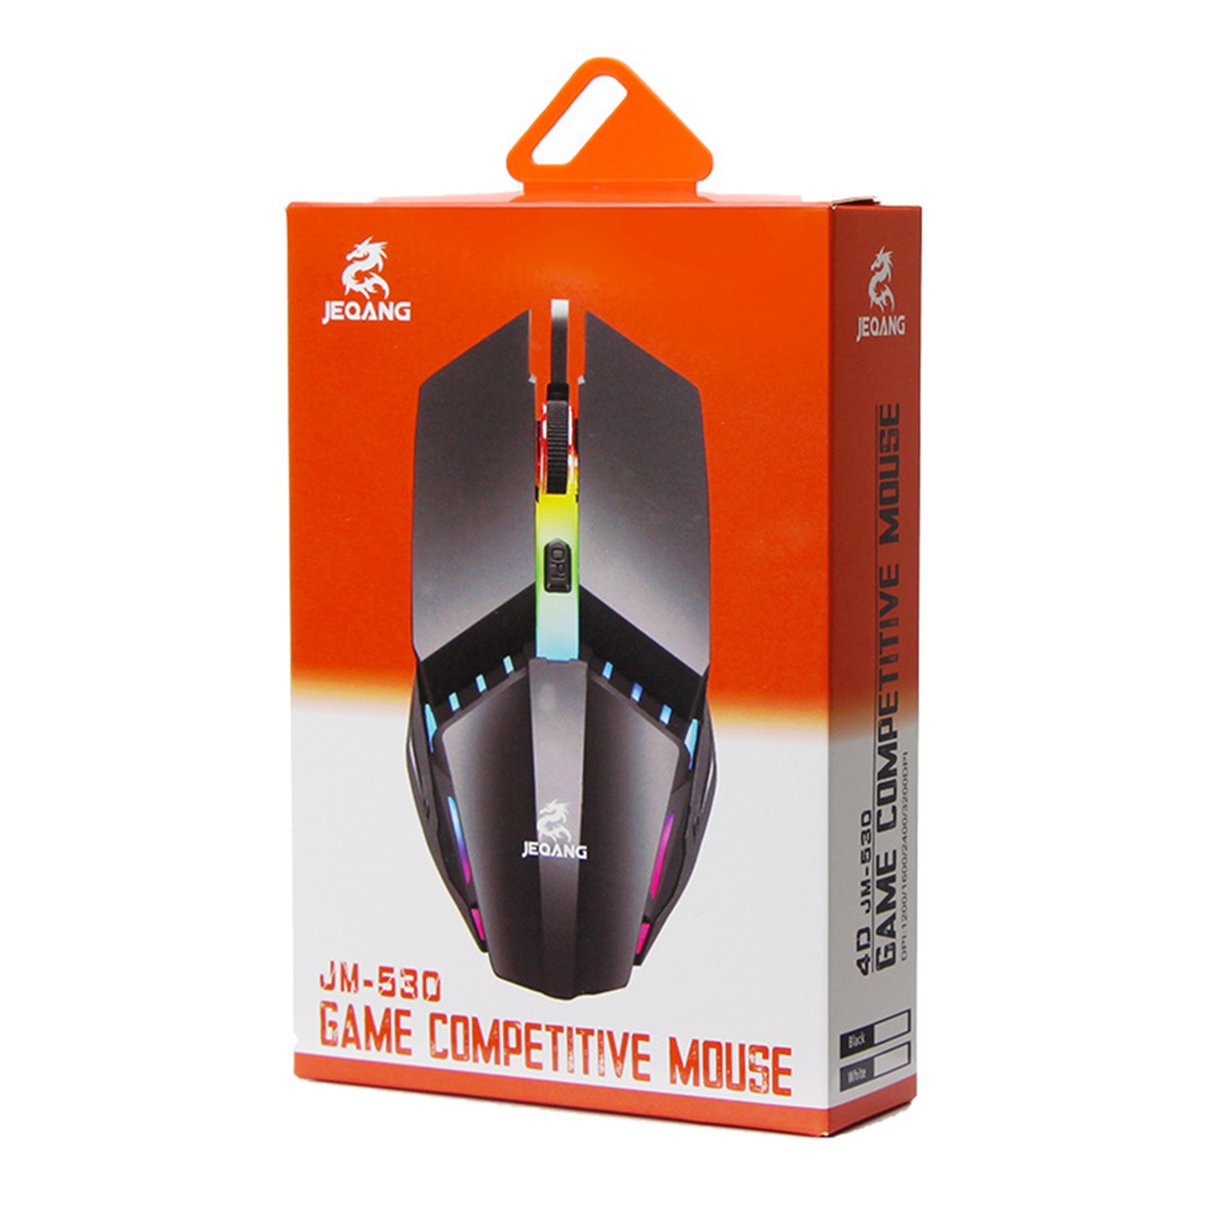 JM-530 Ergonomic Wired Gaming Mouse LED USB Computer Mouse Gamer Mice